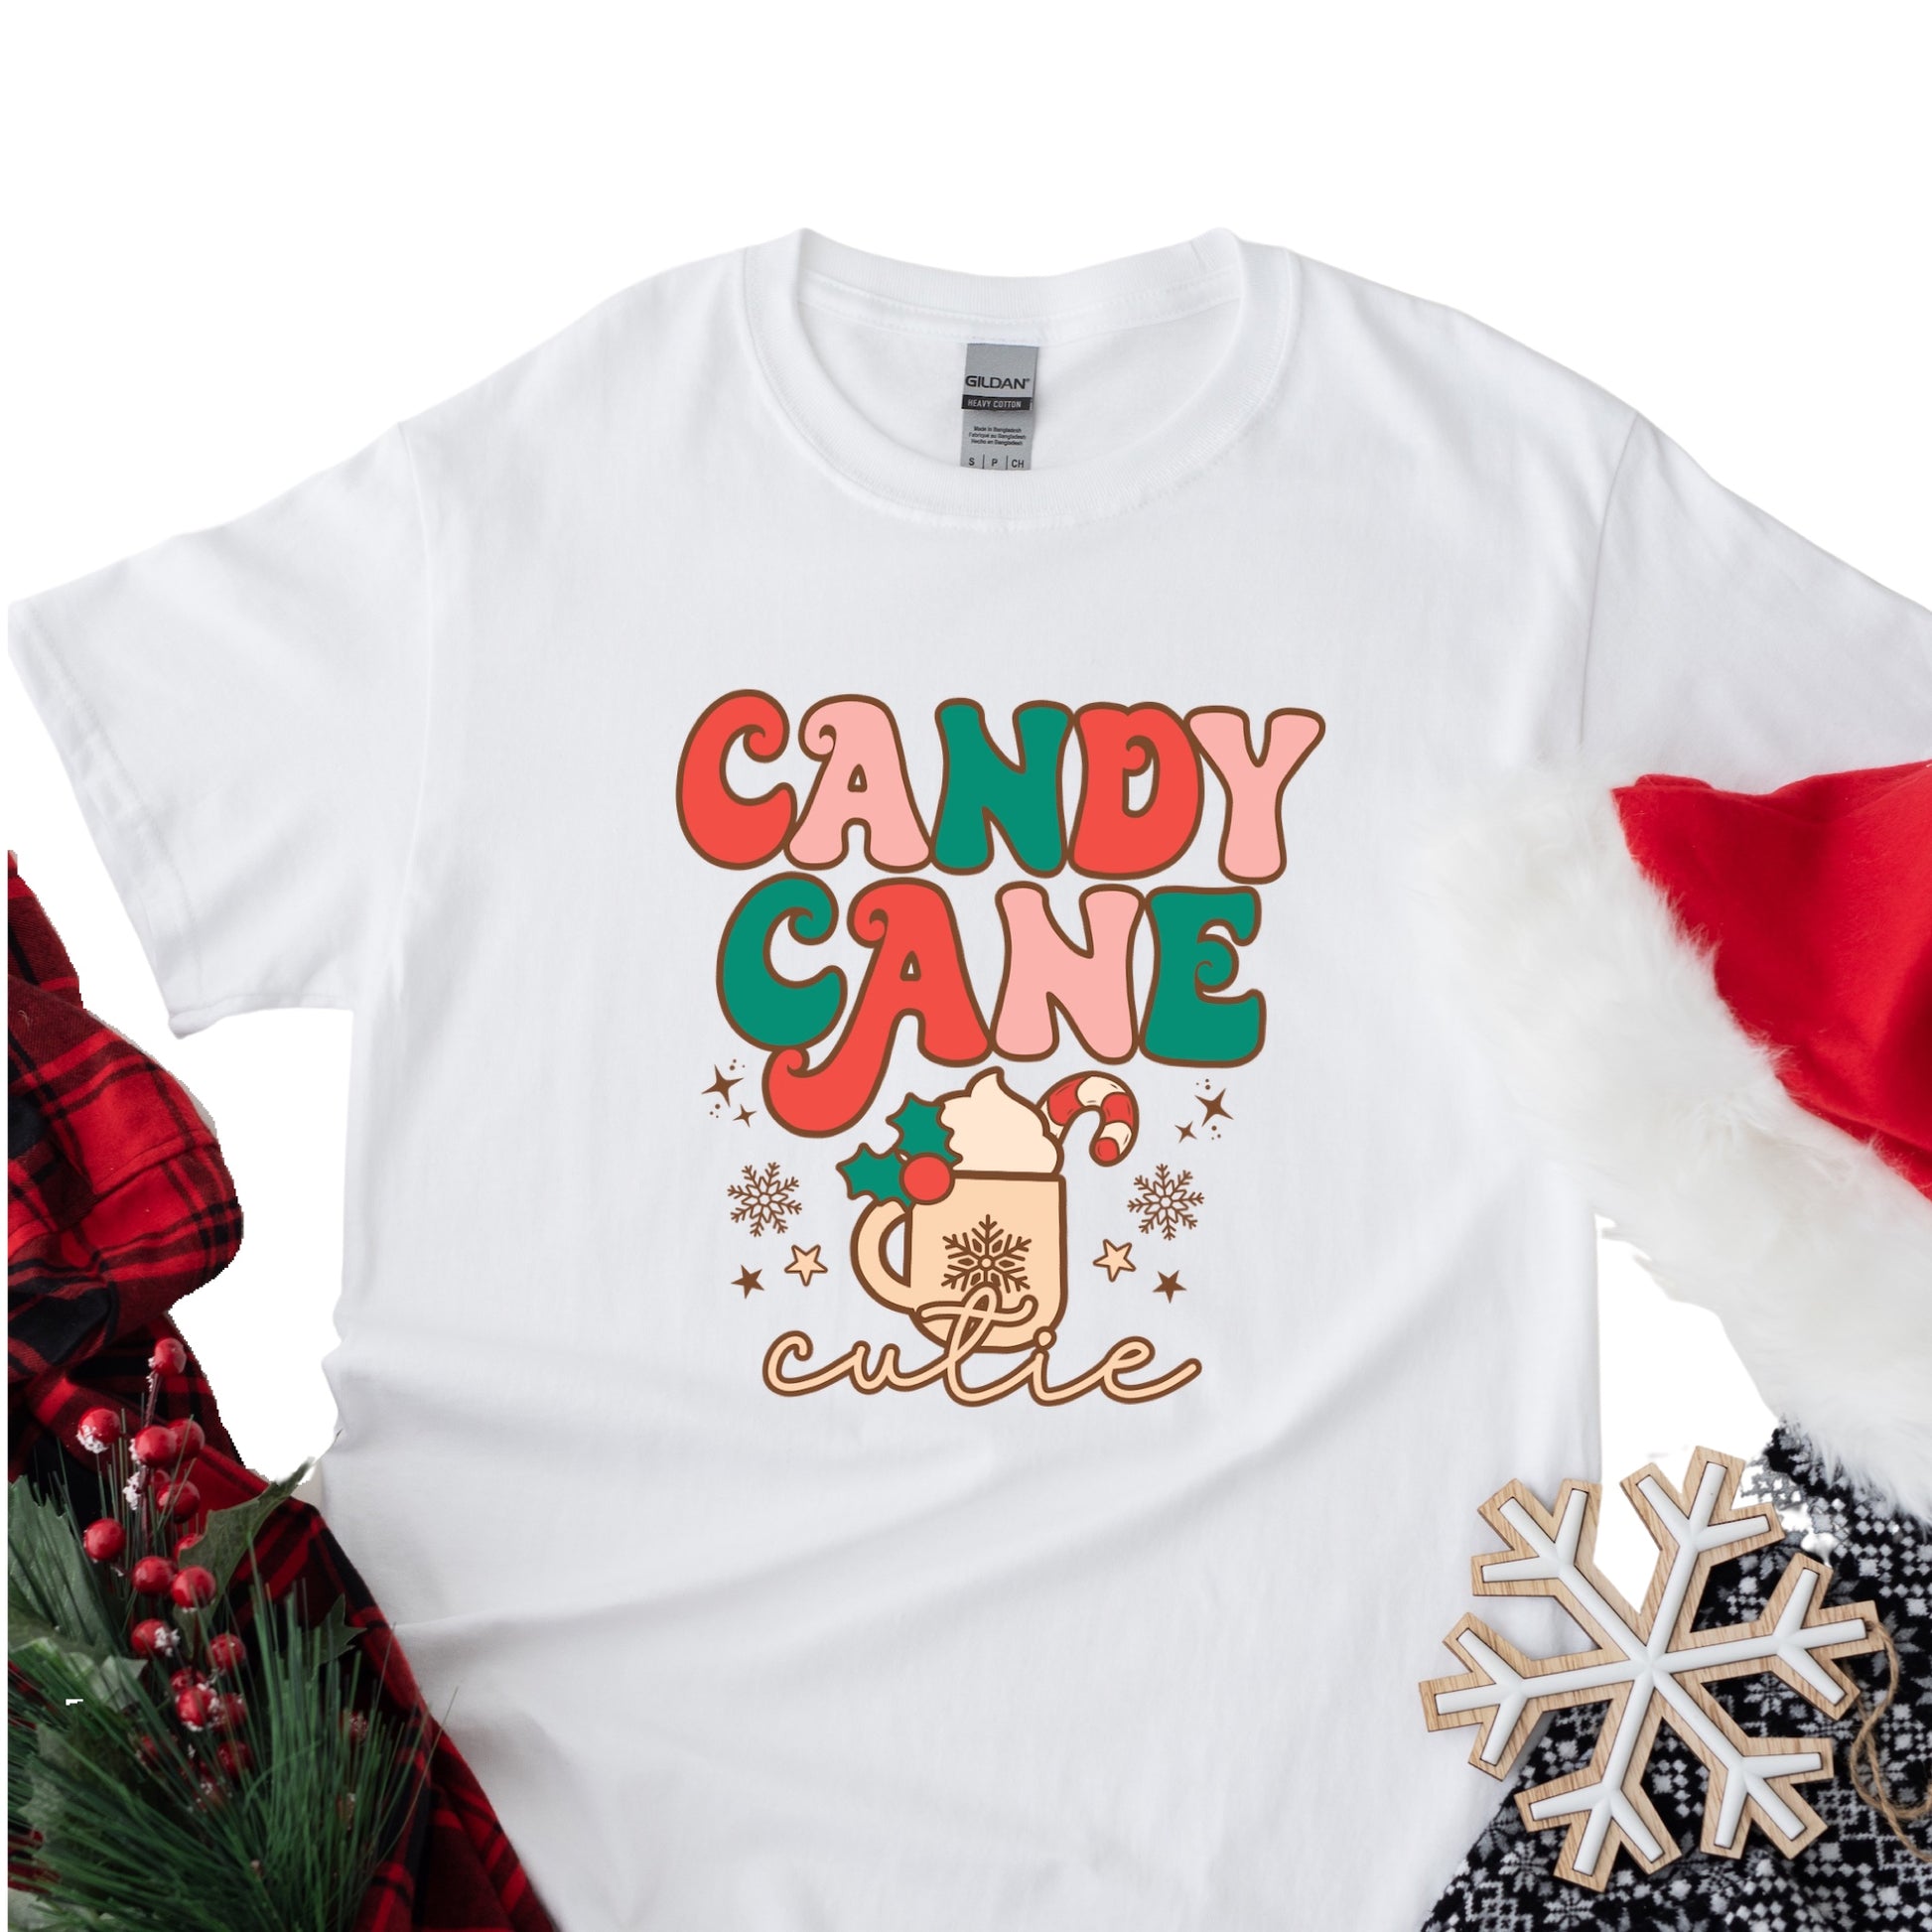 "Candy cane cutie" Christmas iron on heat transfer